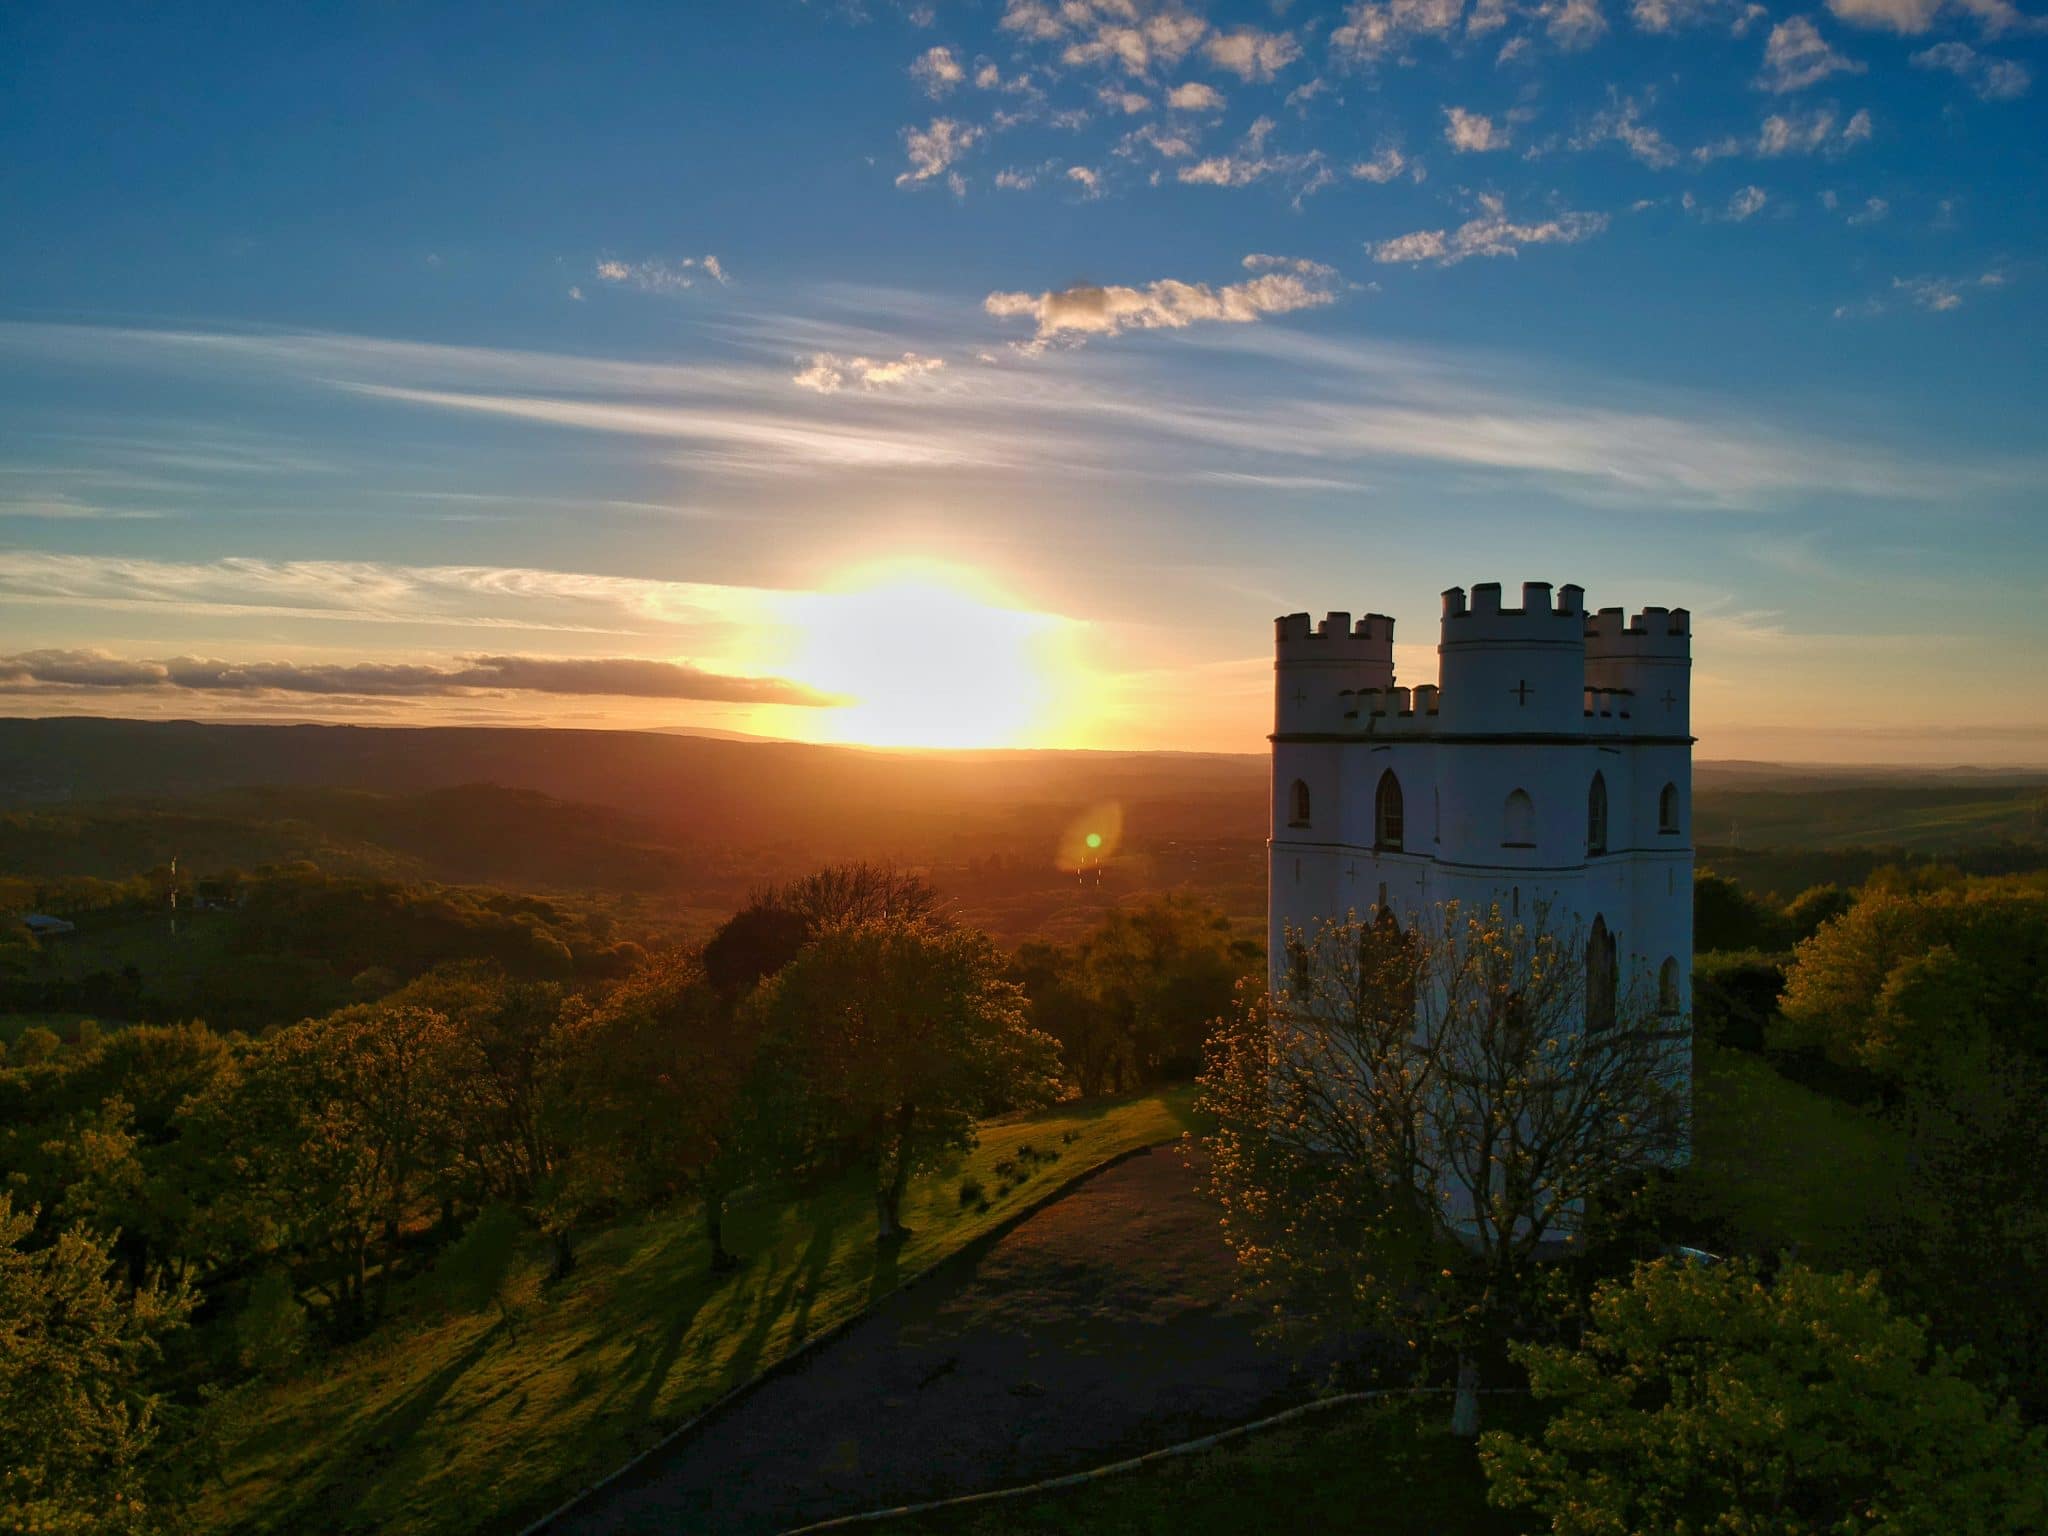 A beautiful castle with the sun setting in the background in Dartmoor